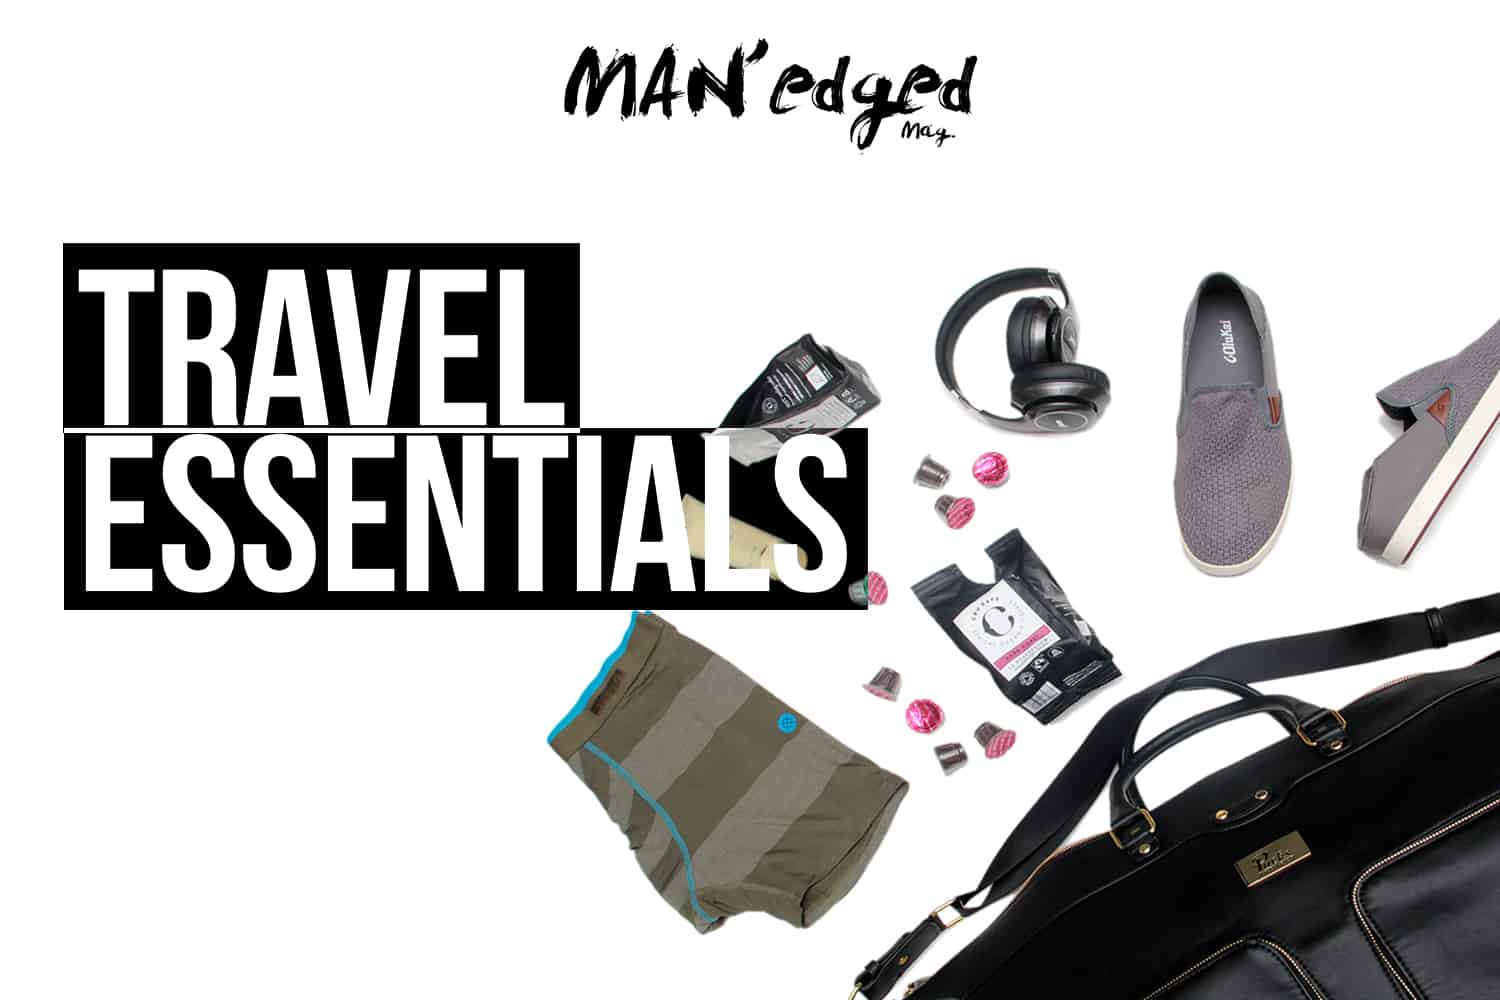 Men's travel essentails featuring Packs project bag, shoes, headphones, underwear, and coffee!